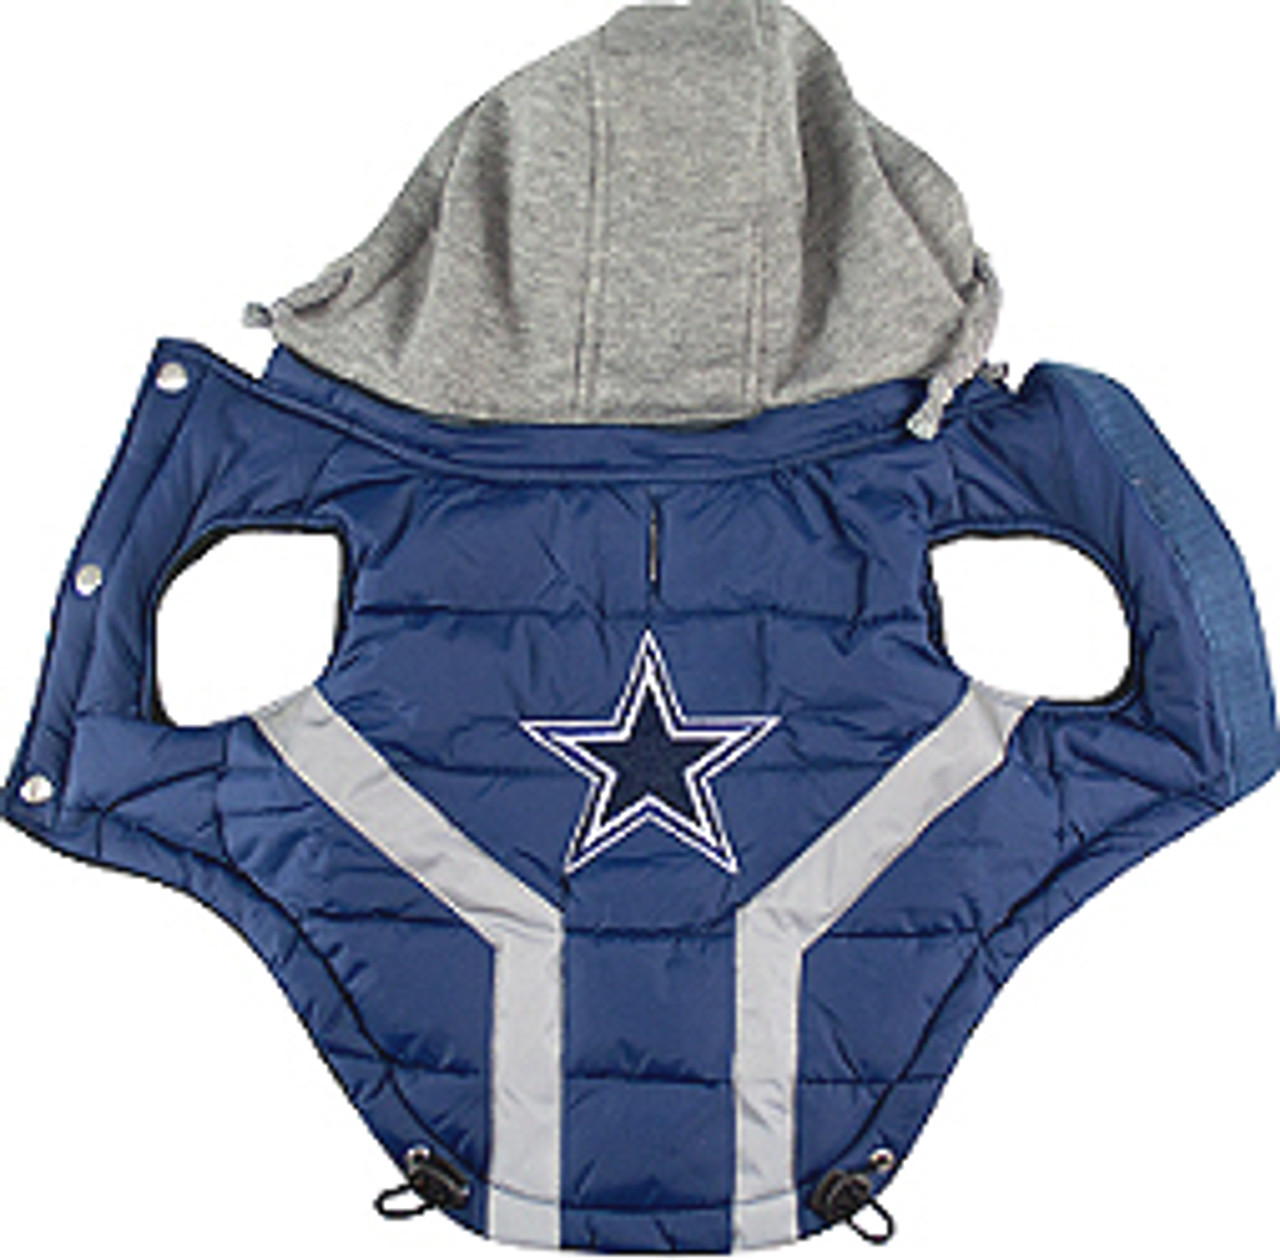  NFL Dallas Cowboys Mesh Dog Jersey : Sports & Outdoors